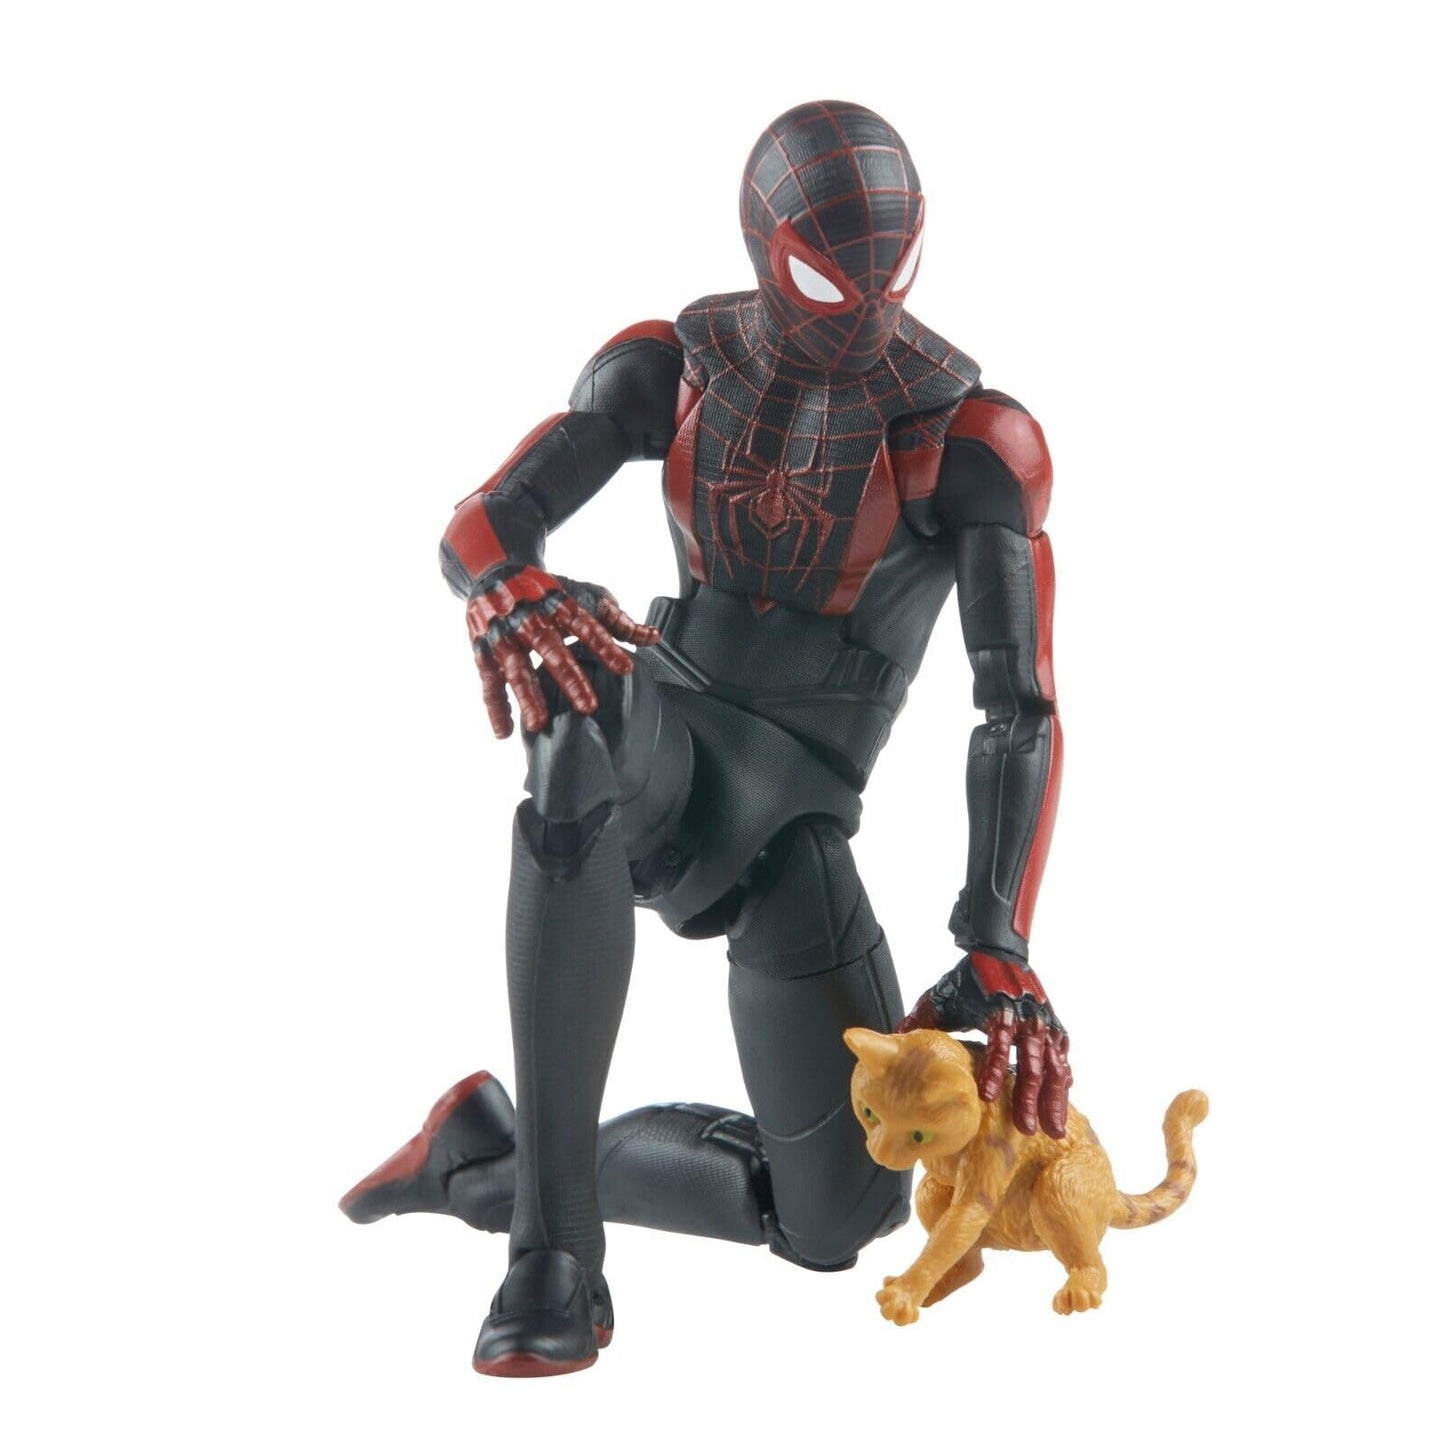 Marvel Legends Series - 6" Figure and Accessories - Miles Morales Gameverse - F7056 - Hasbro, Pending.